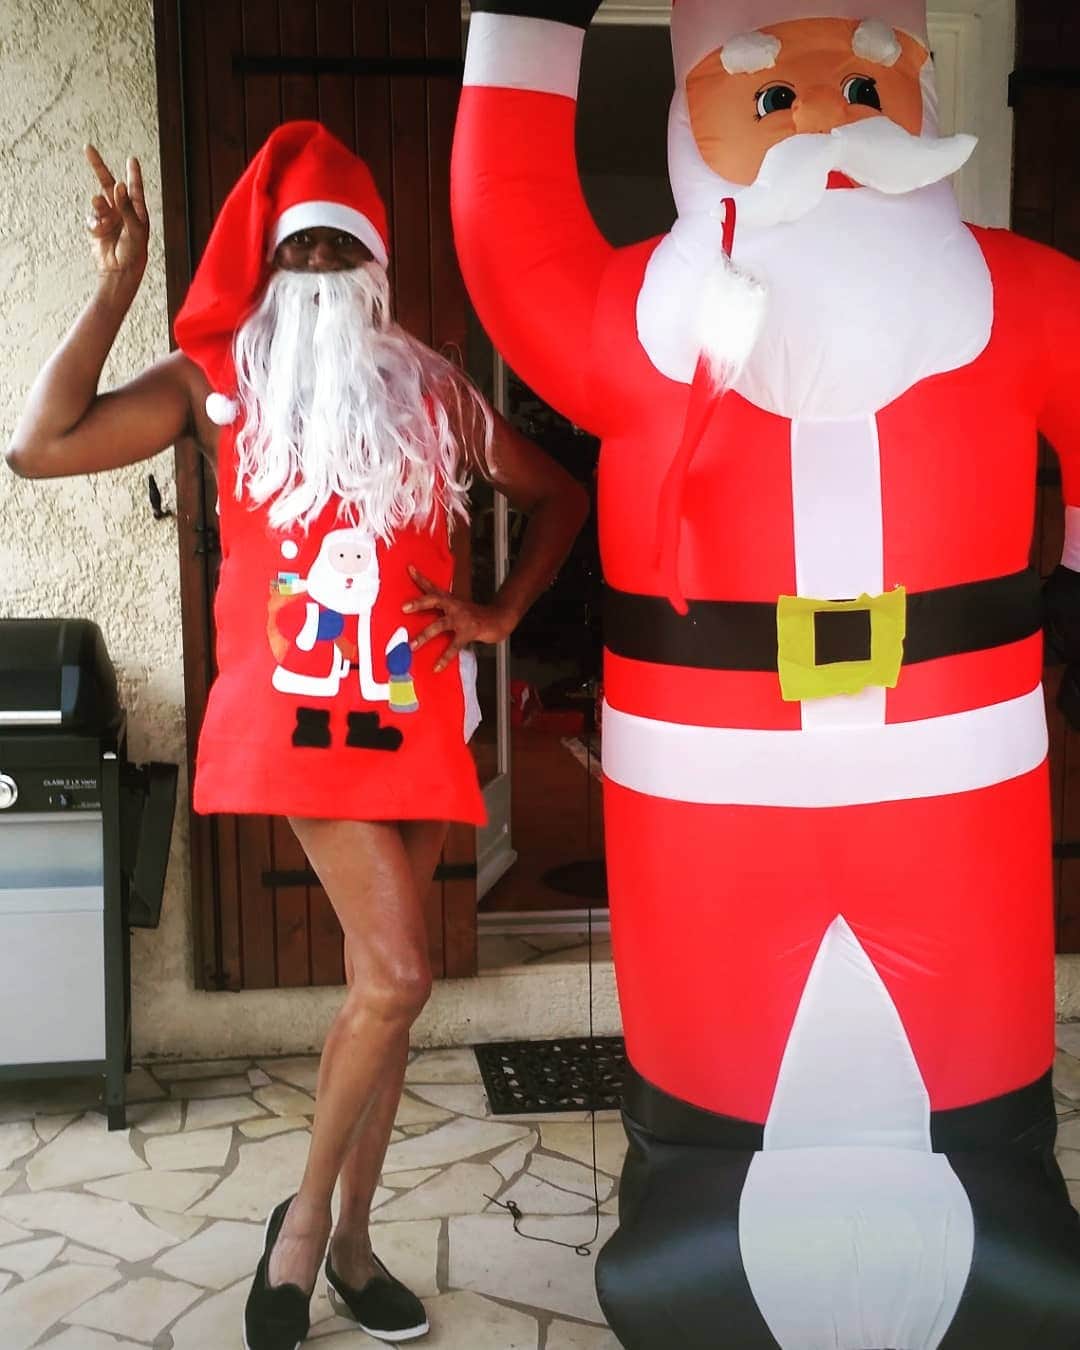 J・アレキサンダーのインスタグラム：「Pre Pandemic  GoodMorning, Afternoon  and Evening friends and fans OK..! OK..! Last Christmas pic of Me and #Santa this year saying #byebitch #PEACEOUT2020 in #ArcachonFrance   Thanks for pic @marieoneillcastagne   #Arcachon #france #santa #santaclaus #missj #missjalexander #msj #santahat #fashion #menwithstyle #mensoutfit #catwalk #runway  #beard #legsfetish #legstagram #legsout #crossdressing」